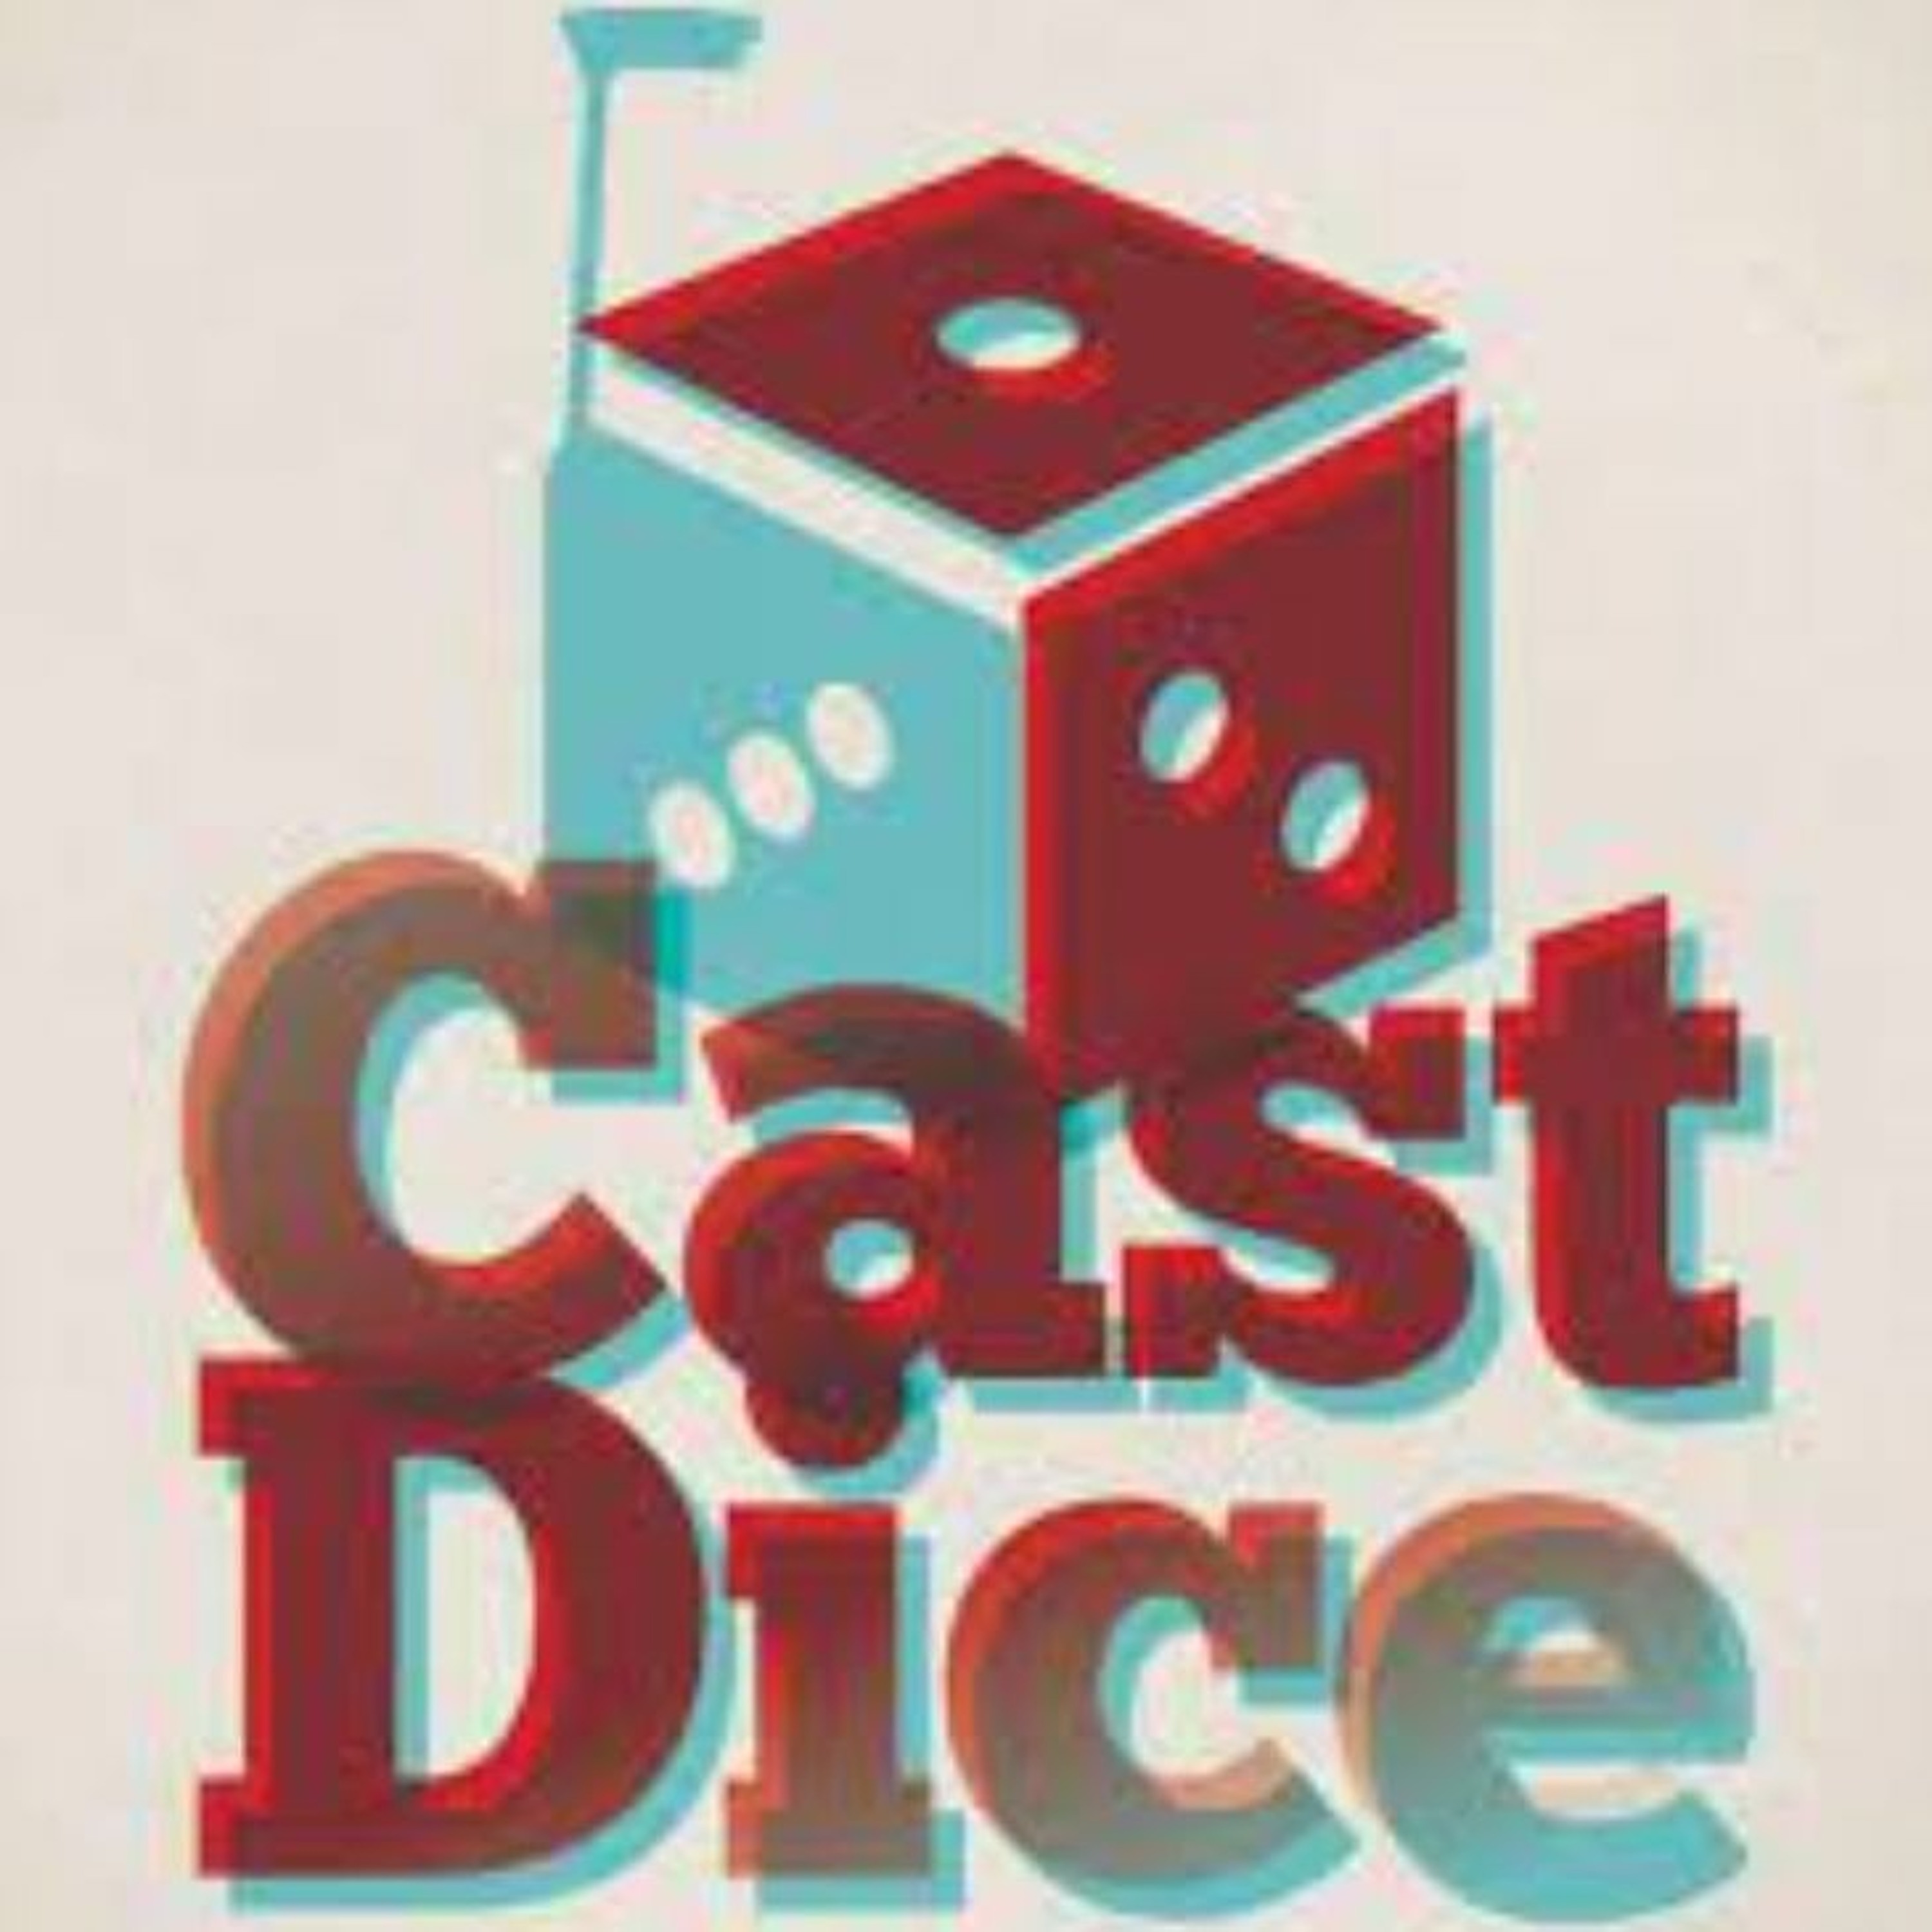 The Cast Dice Podcast - Episode 194 - Dead By Lead & Blaster Magazine